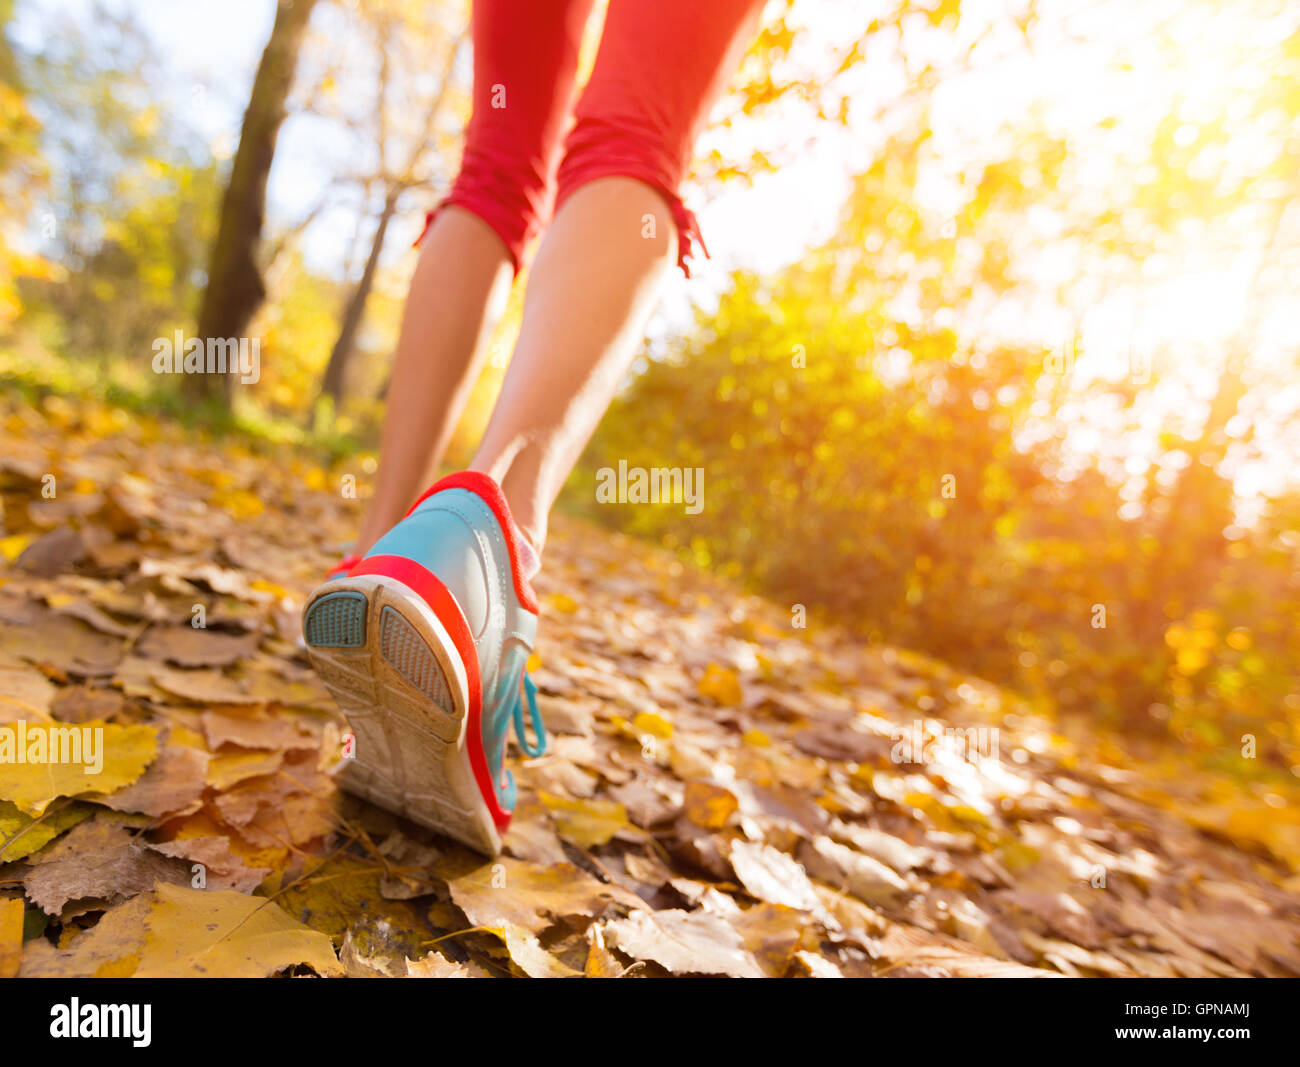 Close up of feet of woman runner running in autumn leaves, concept of training exercise Stock Photo